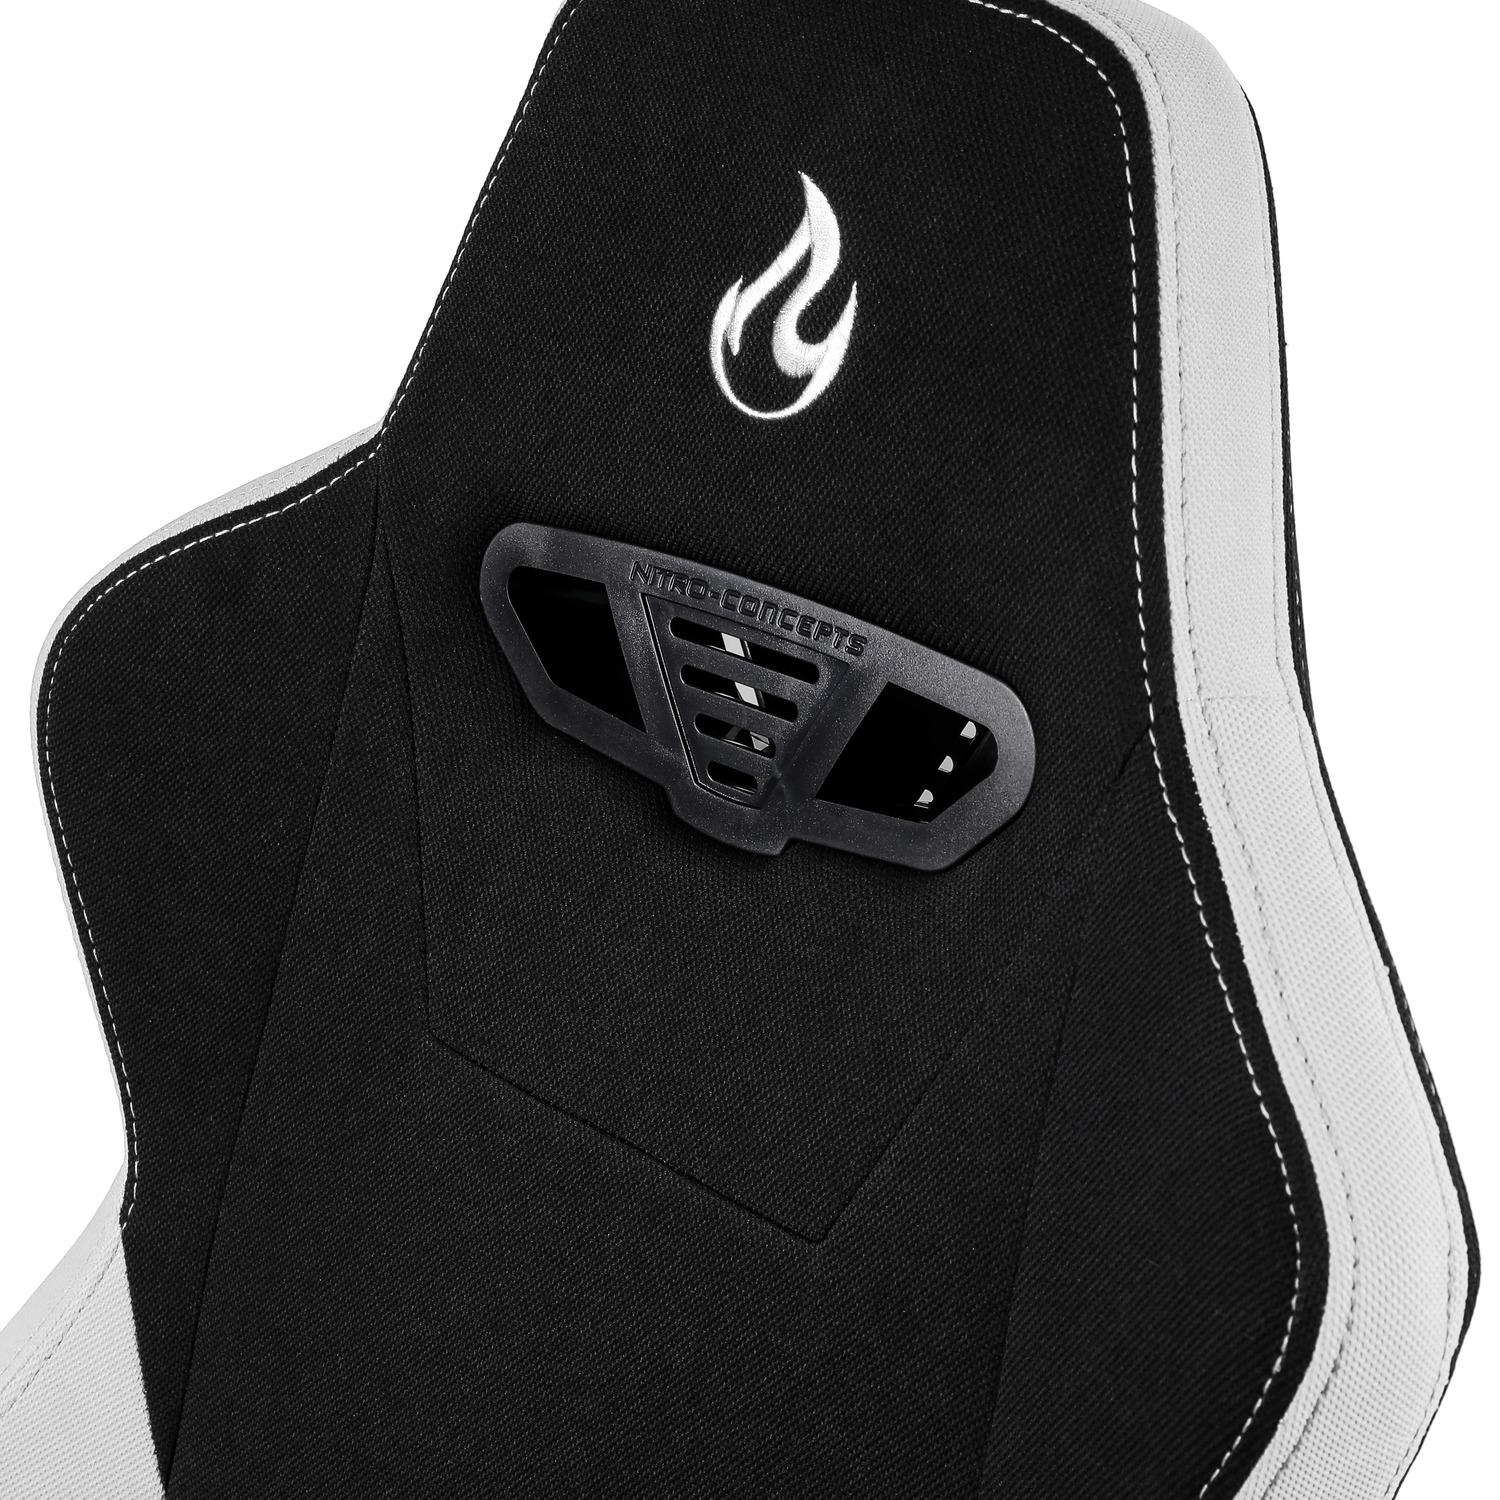 nitro-concepts - Fauteuil gaming S300 Radiant White